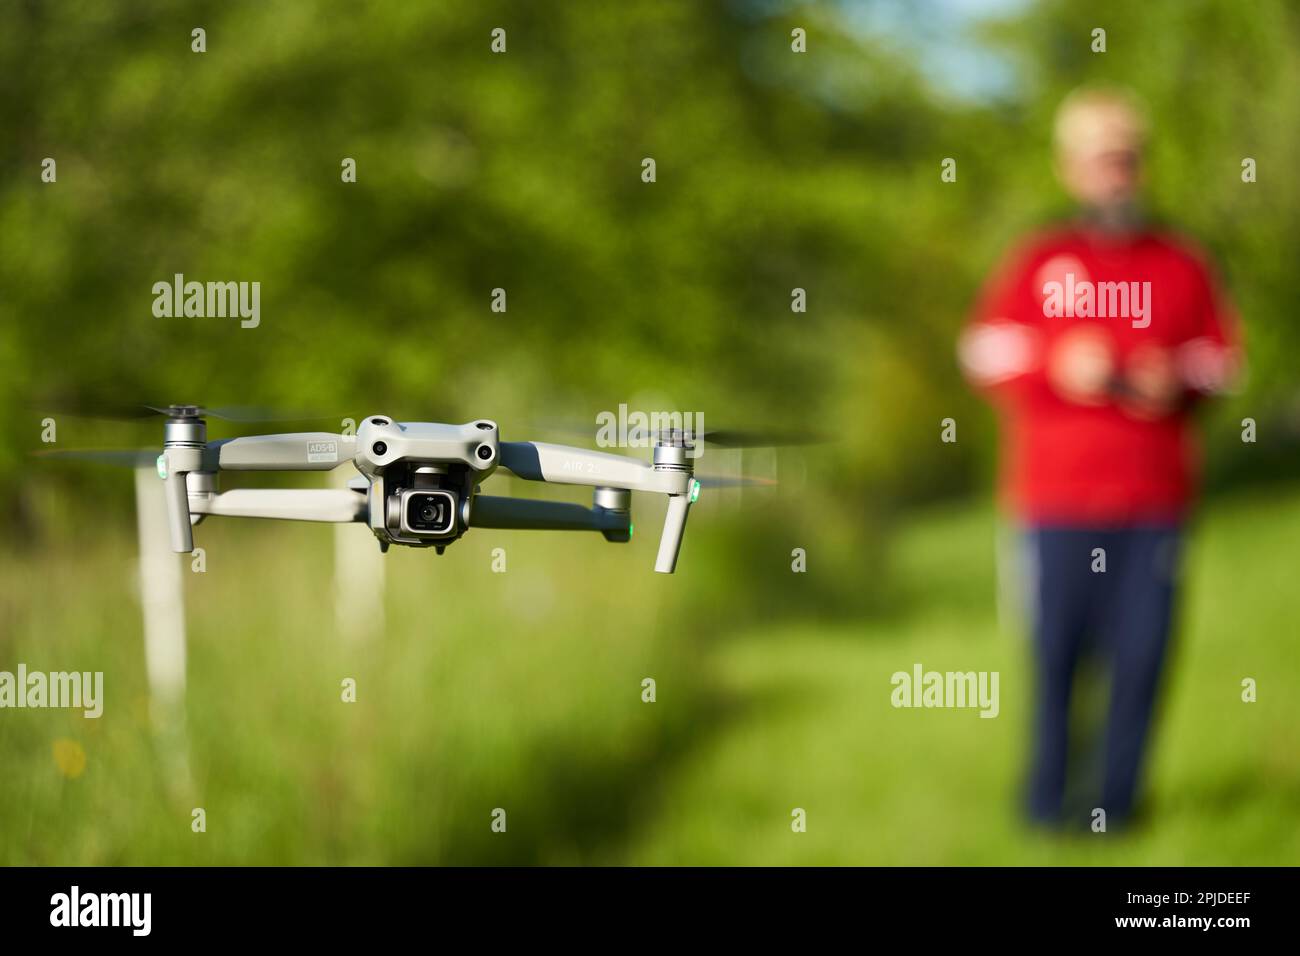 Nürtingen, Germany - May 29, 2021: The drone Dji air 2s. Grey unmanned aircraft system hovers over a green meadow. Pilot out of focus in background. F Stock Photo